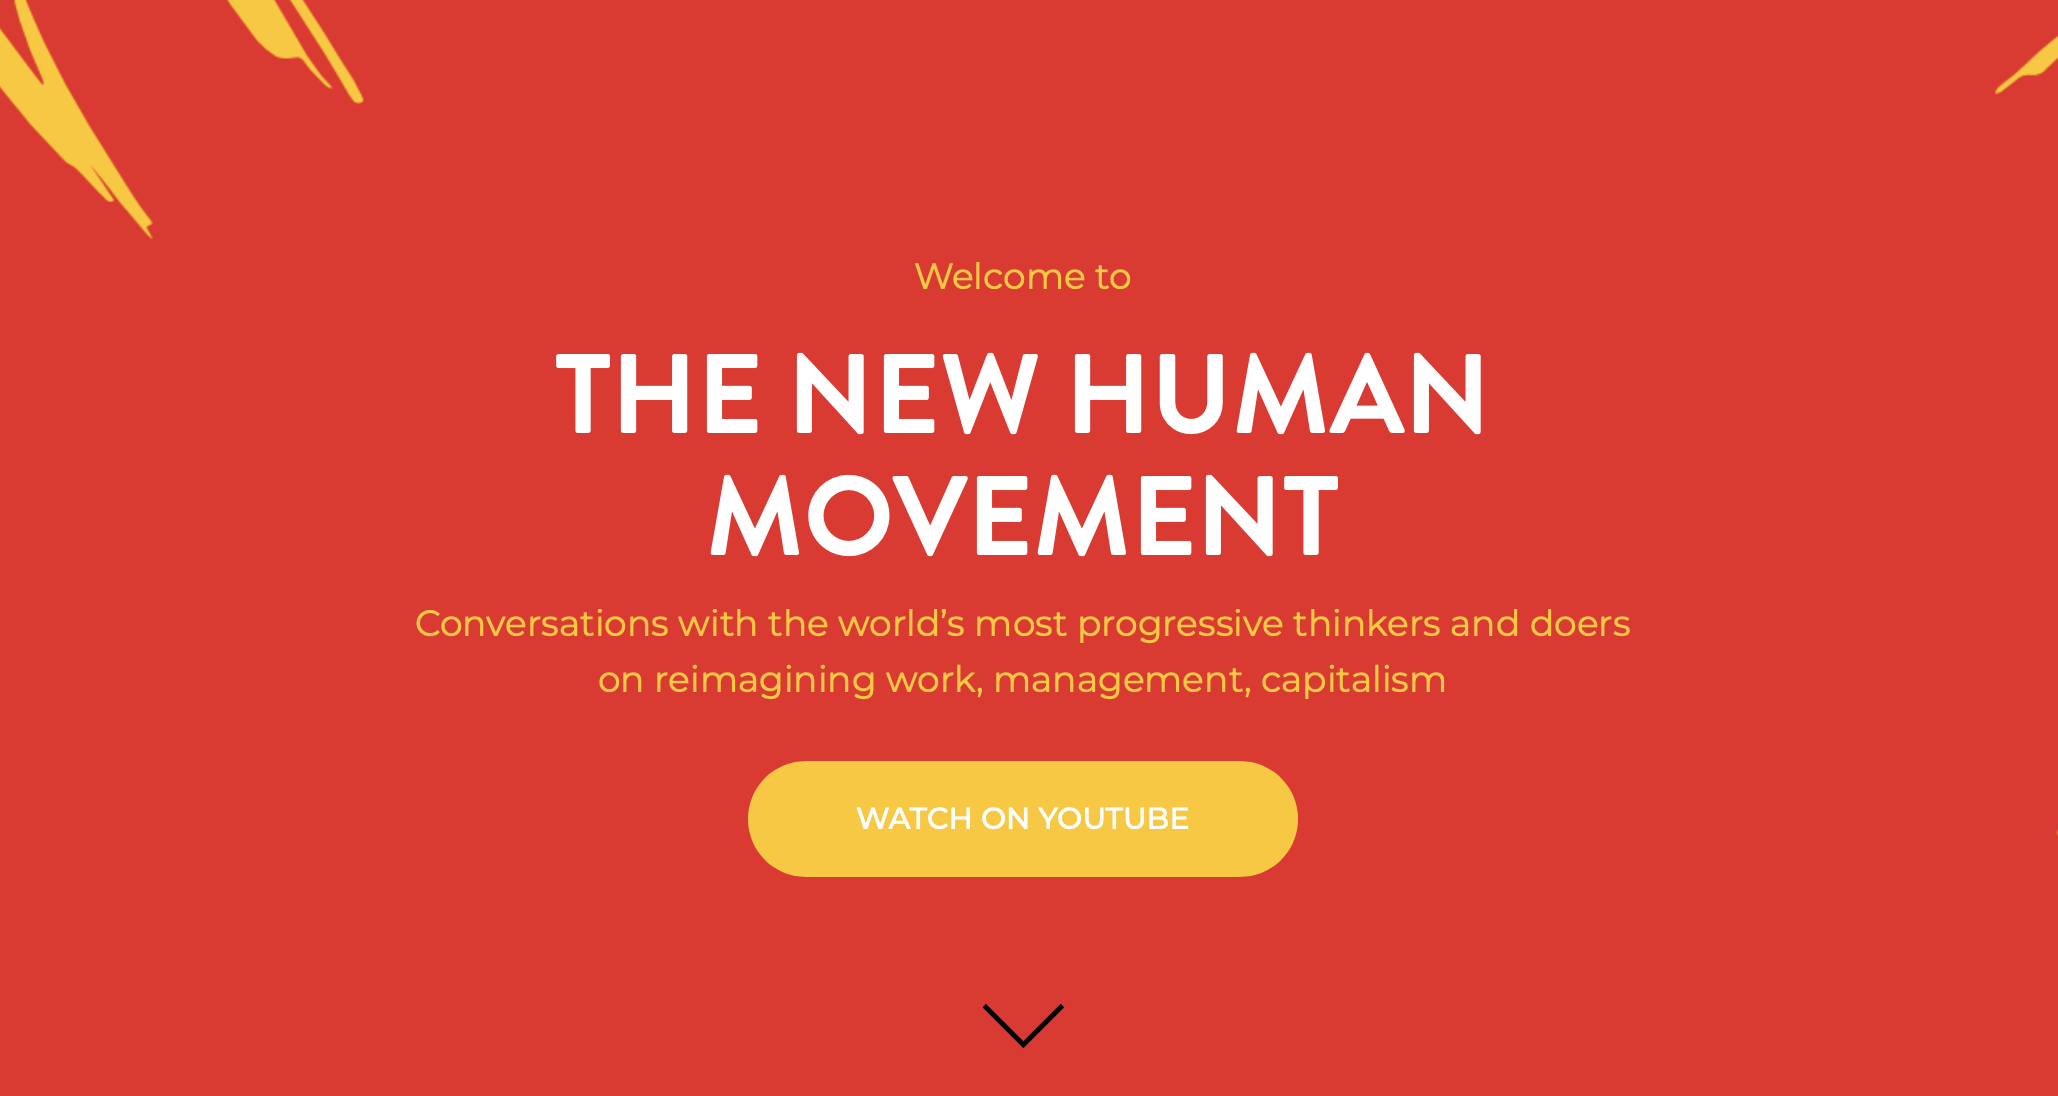 Welcome to the New Human Movement